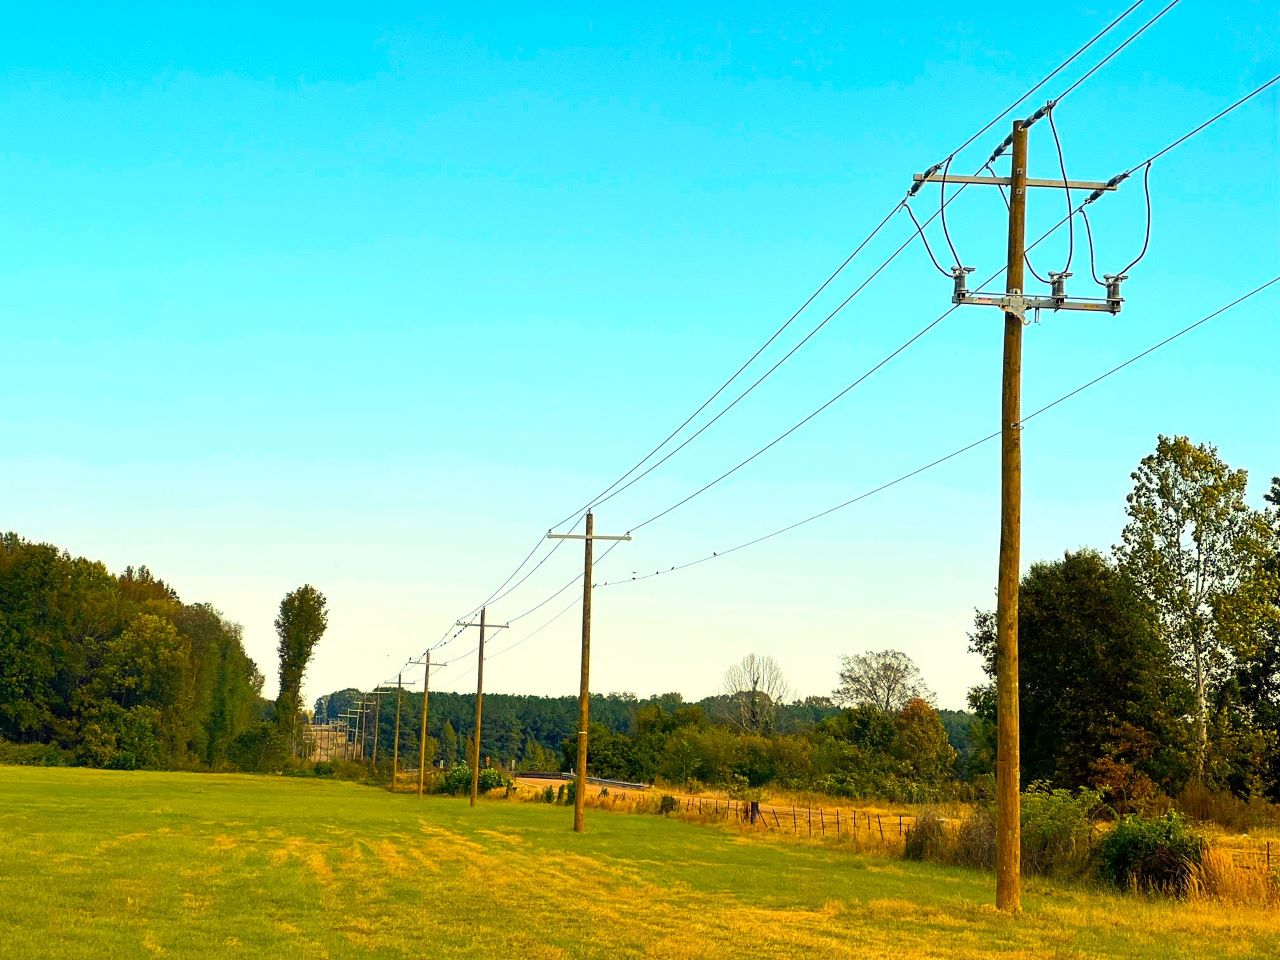 In just this year alone, crews have installed 213 new poles and rebuilt more than 4 miles of power lines in Coldwater.